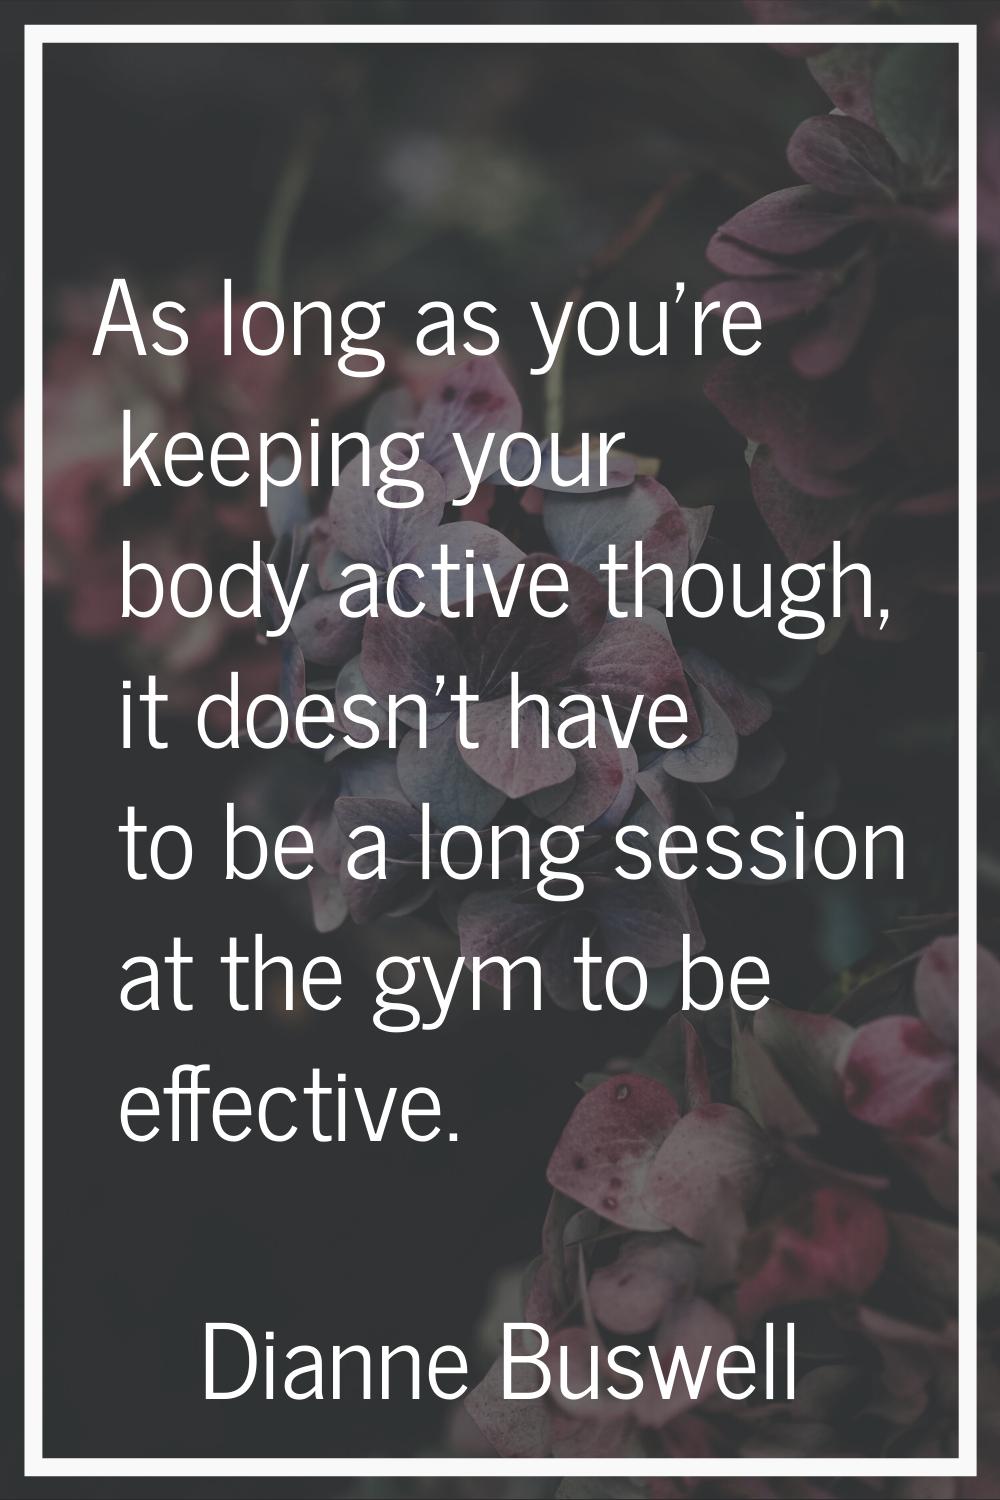 As long as you’re keeping your body active though, it doesn’t have to be a long session at the gym 